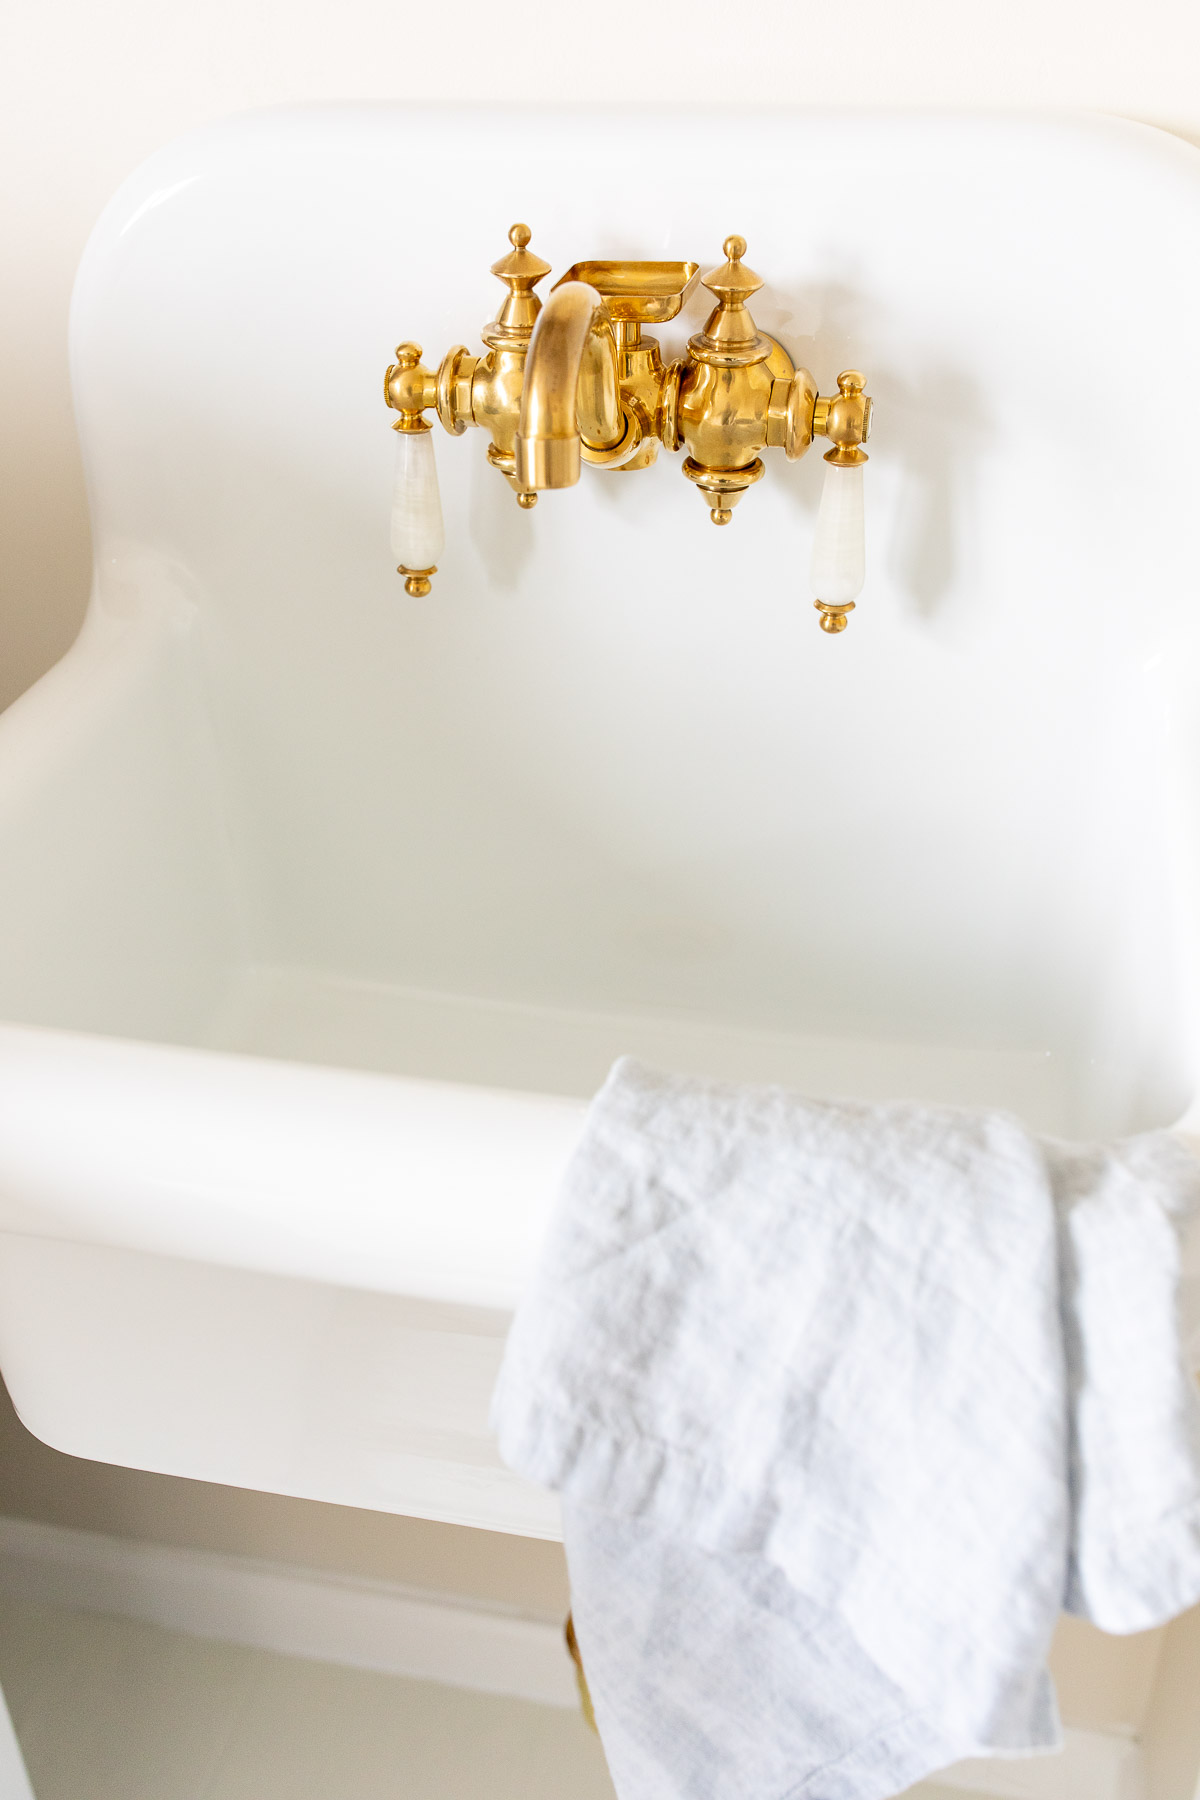 A white ceramic wall mounted sink with brass hardware.